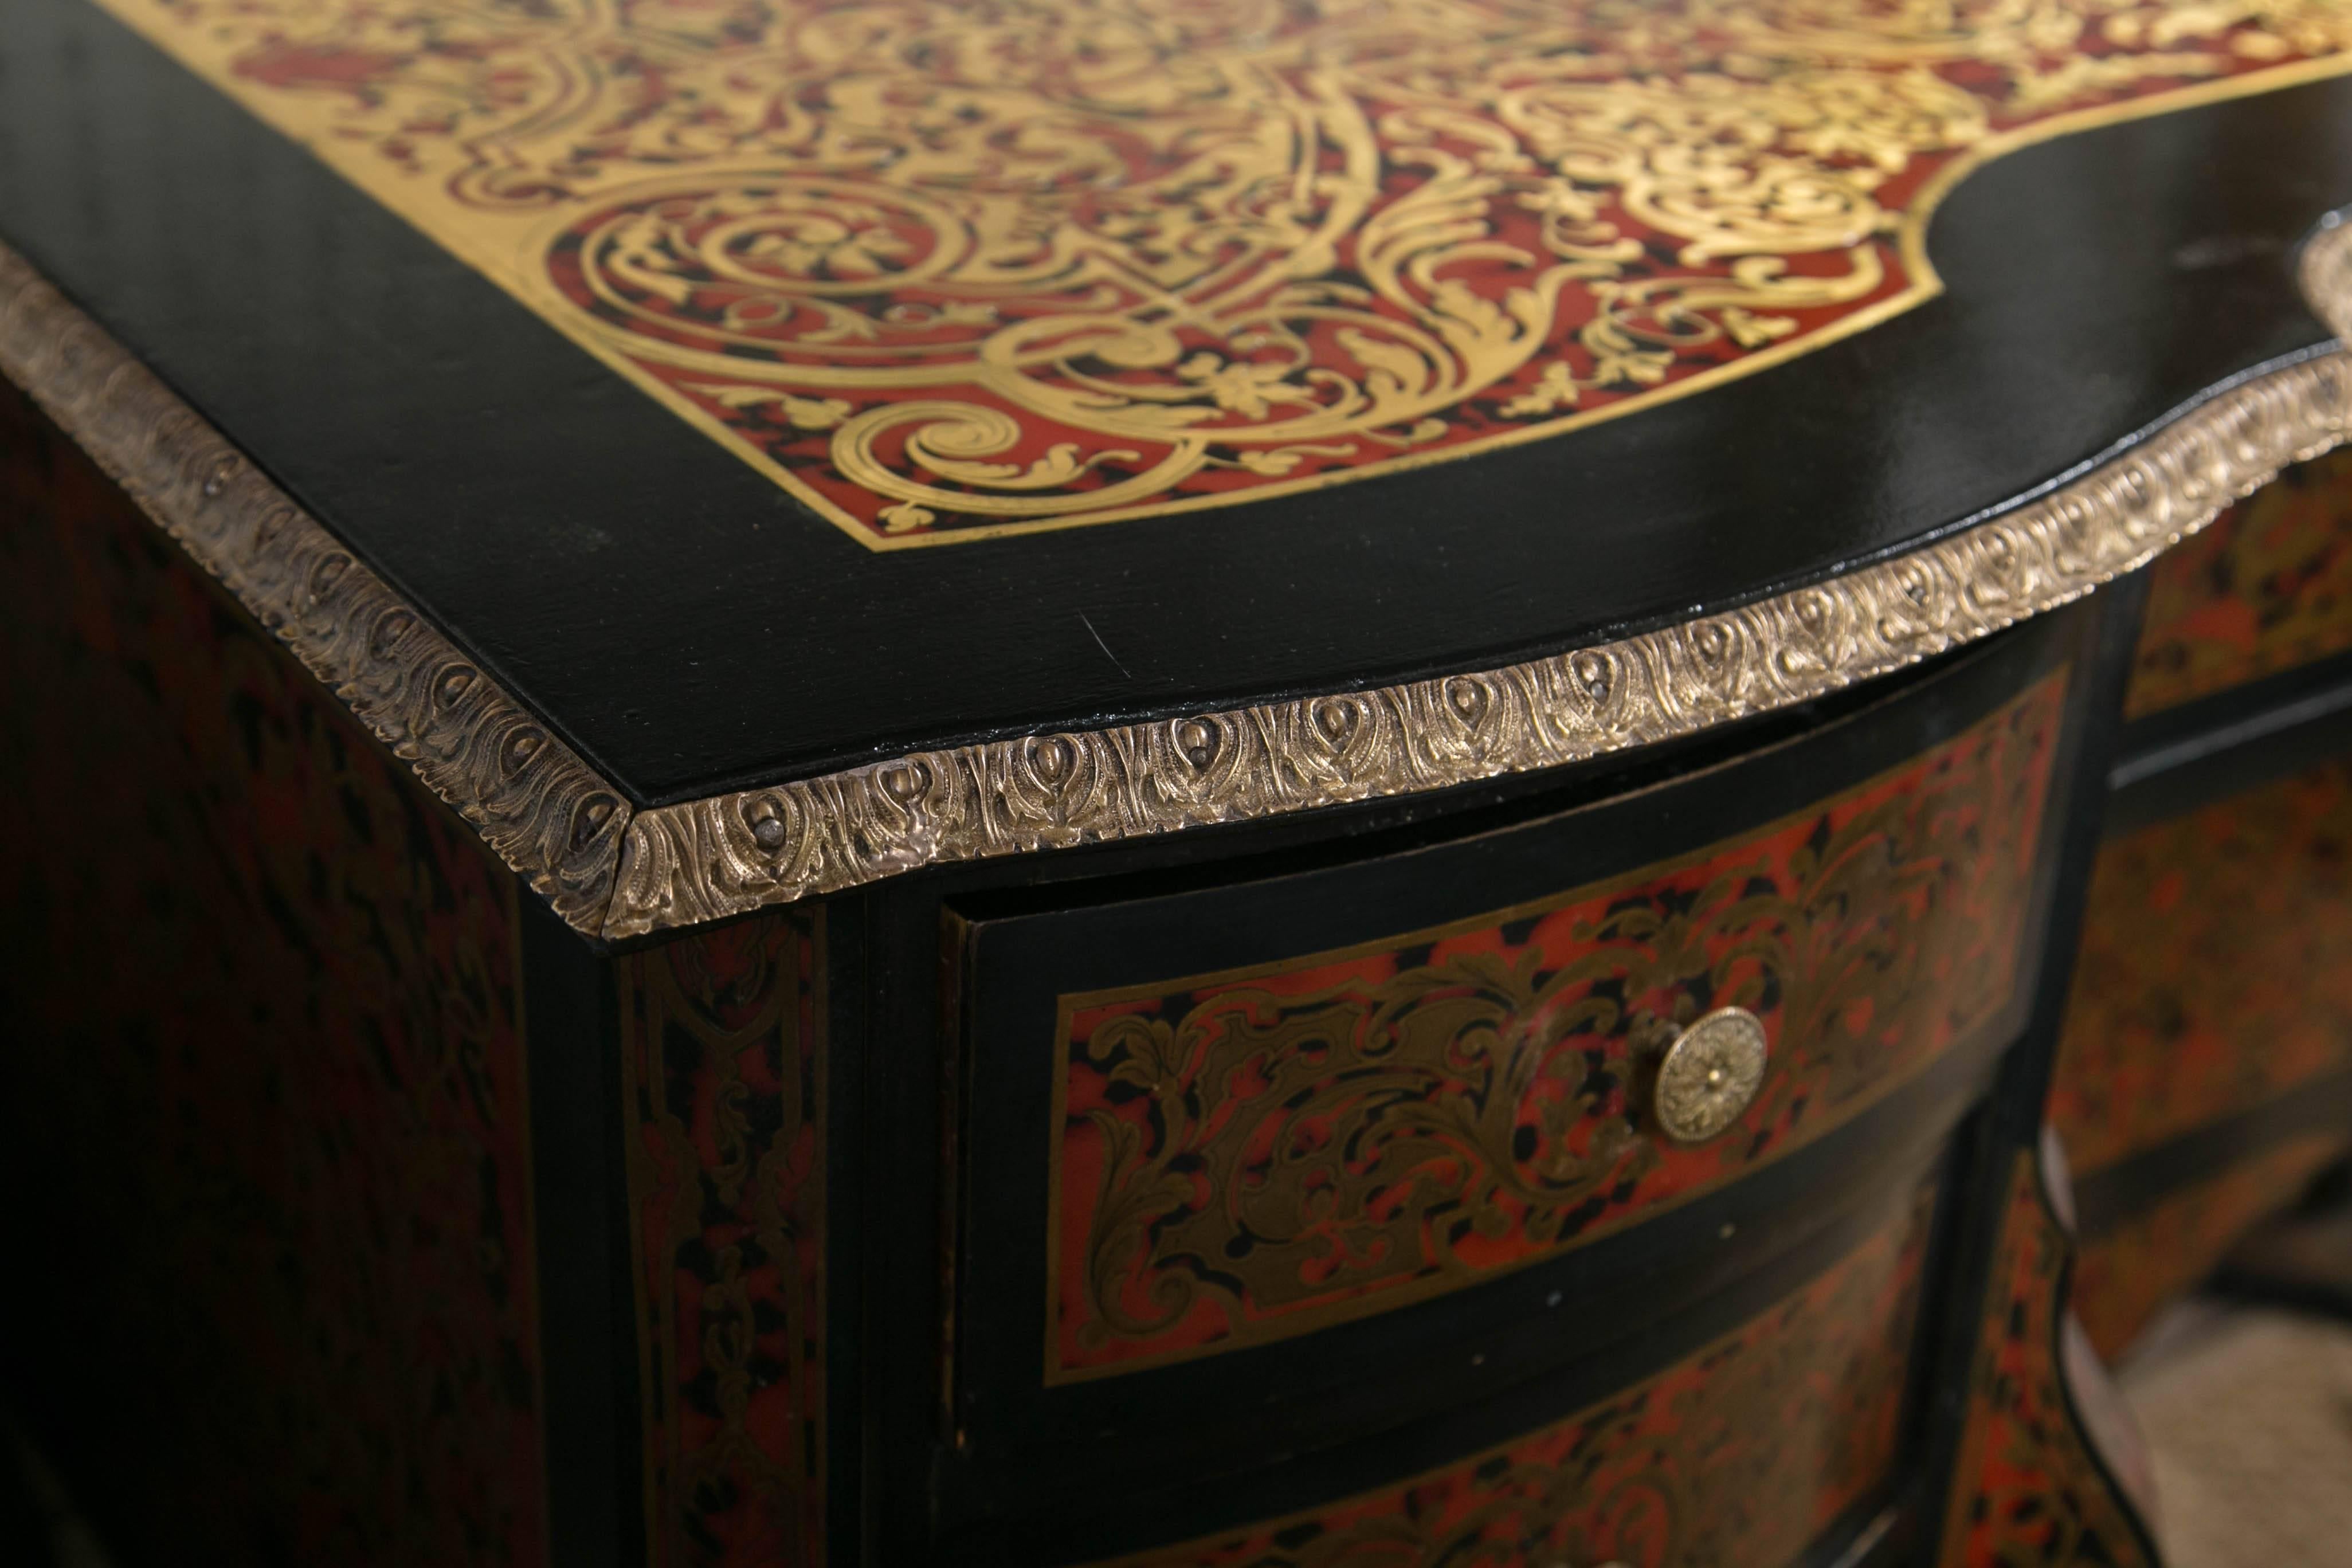 In the Louis XIV style, this desk has faux tortoise shell and brass inlays.
X form stretchers connect the front and back legs below each bank of drawers. There are three drawers on each side, a center drawer and a drop down front cabinet in the